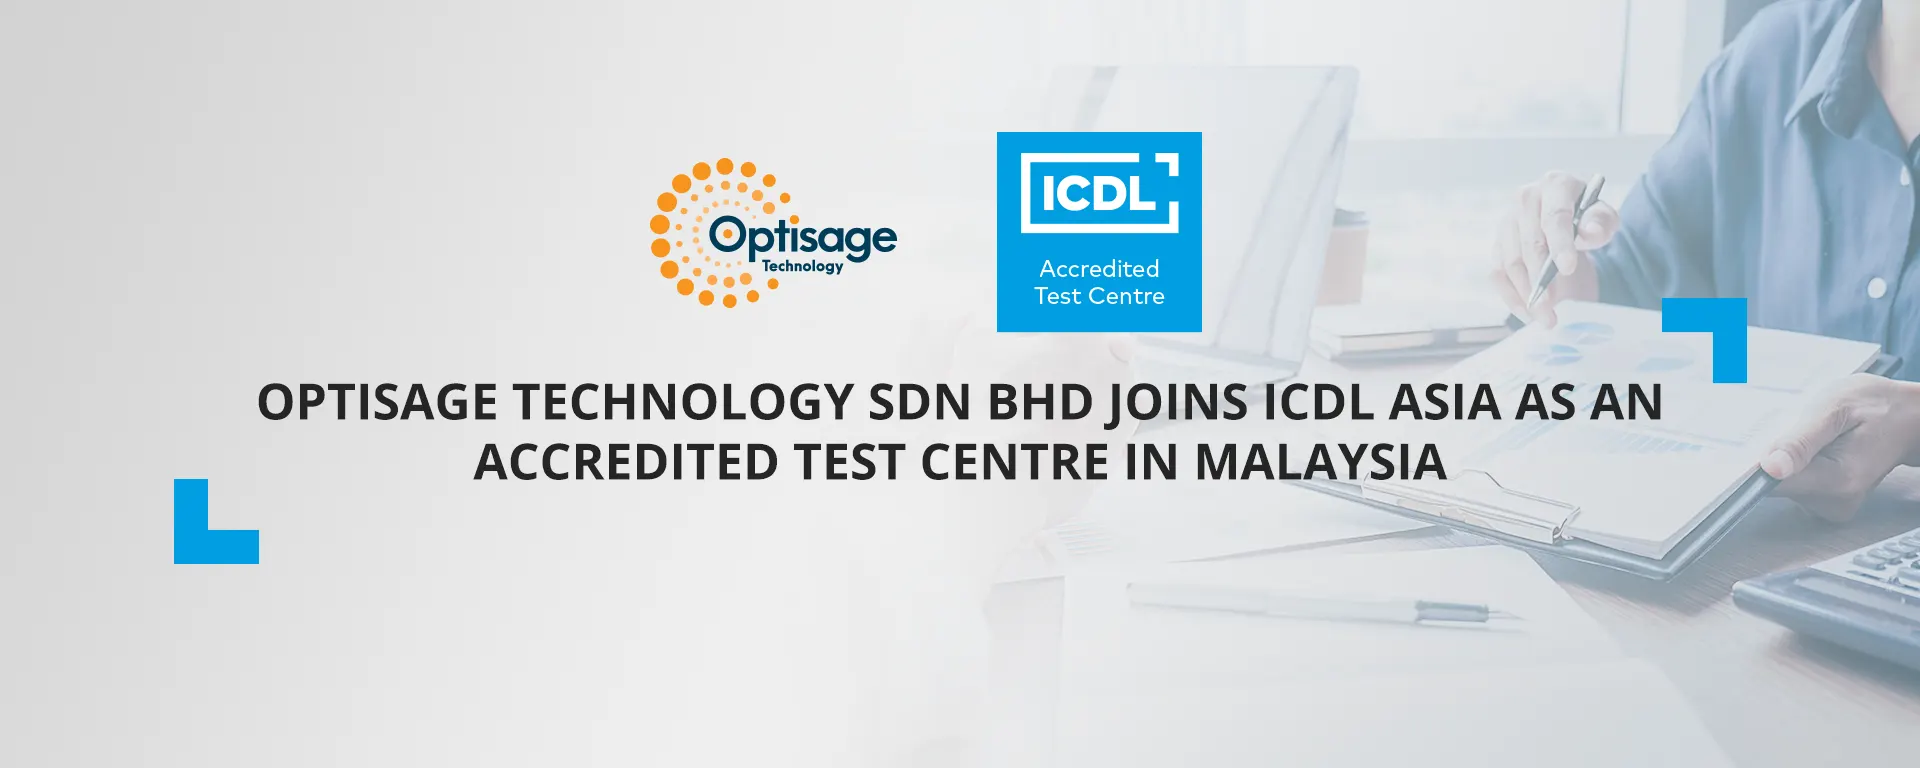 Optisage joins as Accredited Test Centre of ICDL Asia In Malaysia